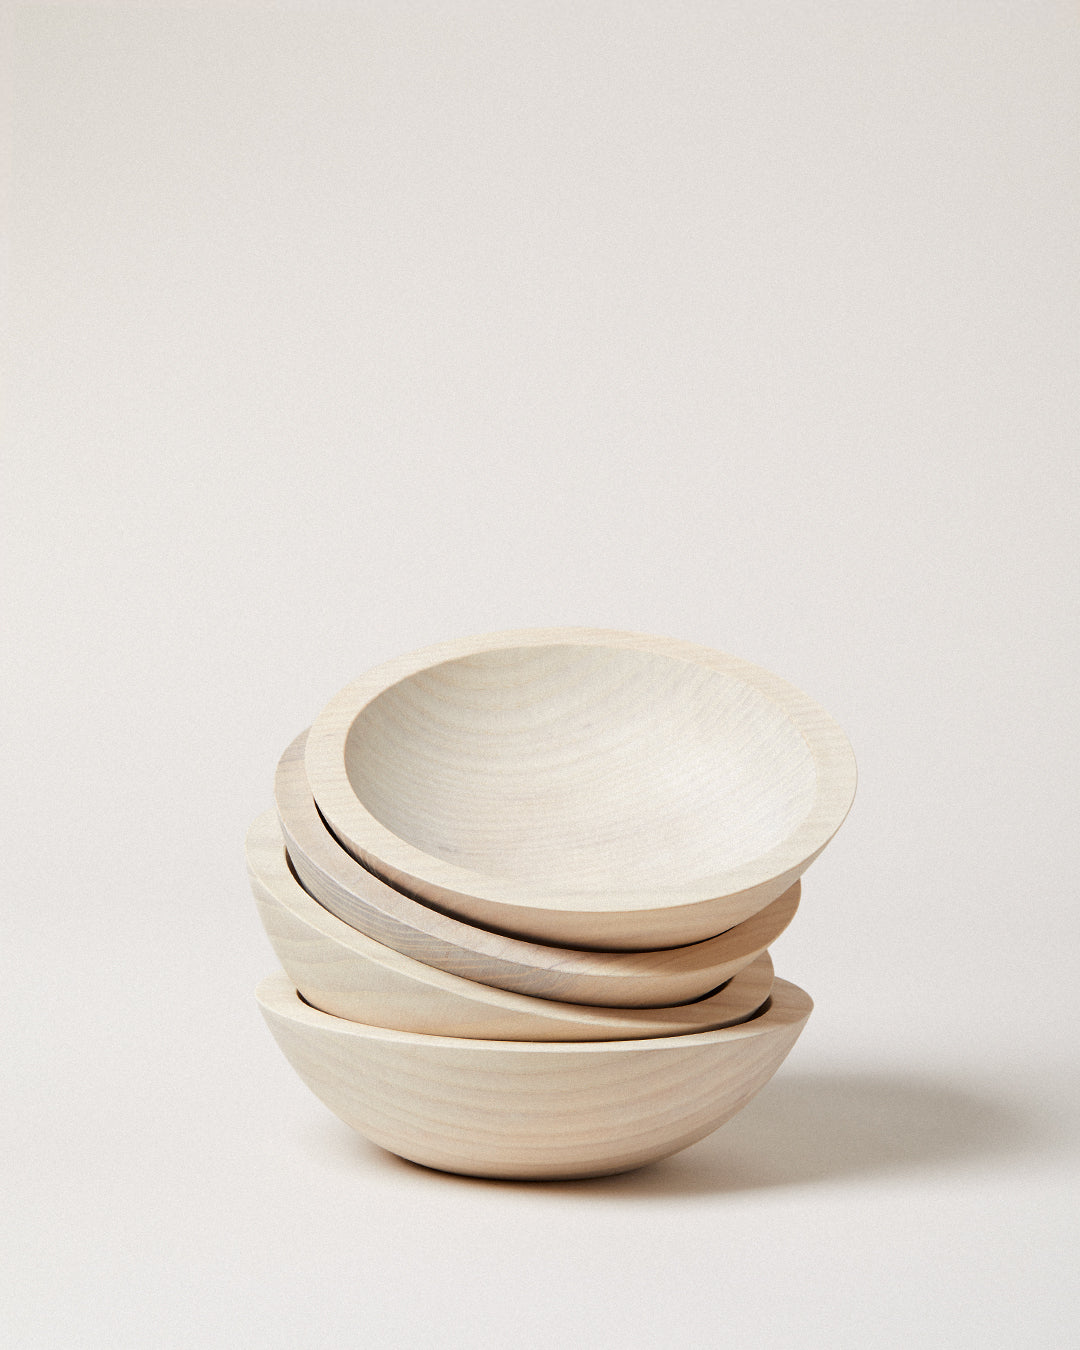 WHITE CRAFTED WOODEN BOWLS